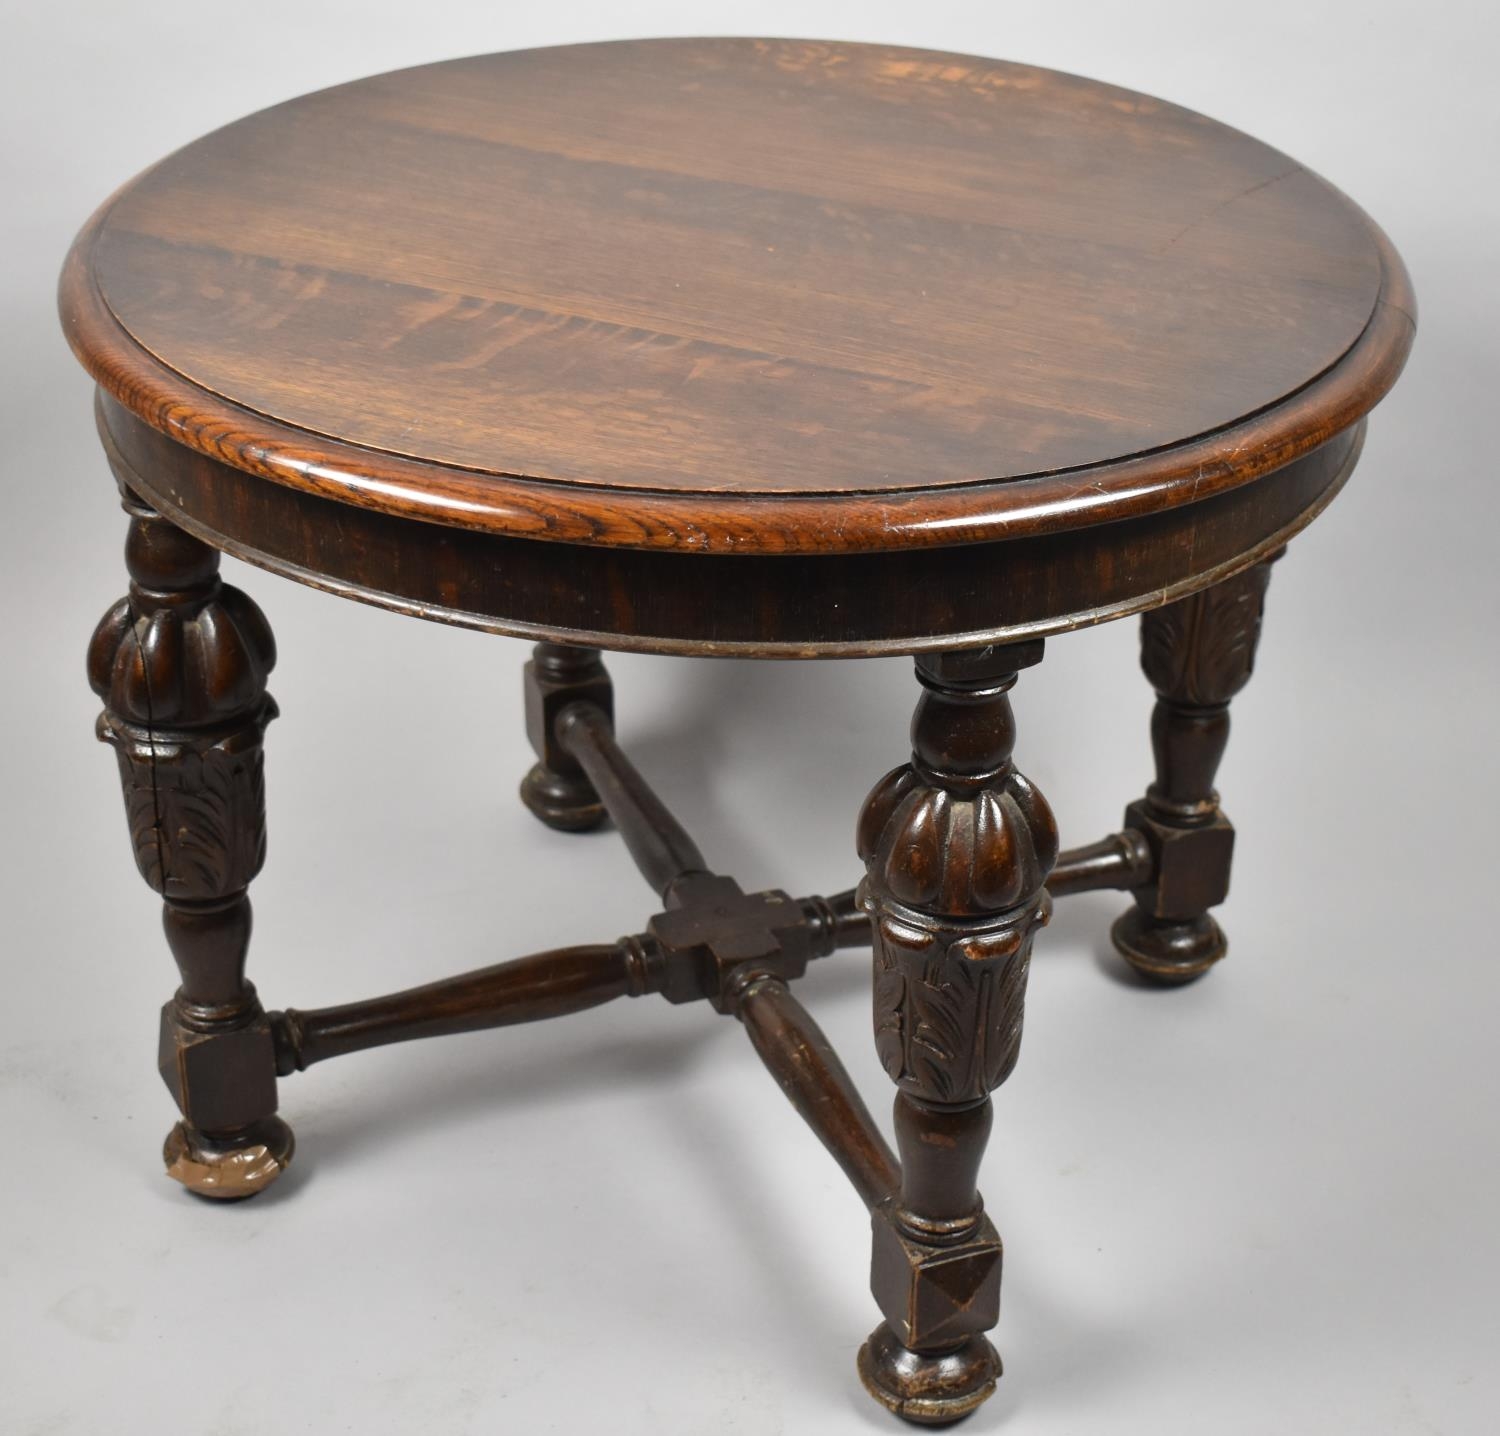 A Mid 20th Century Oak Circular Topped Coffee Table with Carved Bulbous Supports, 61cm Diameter